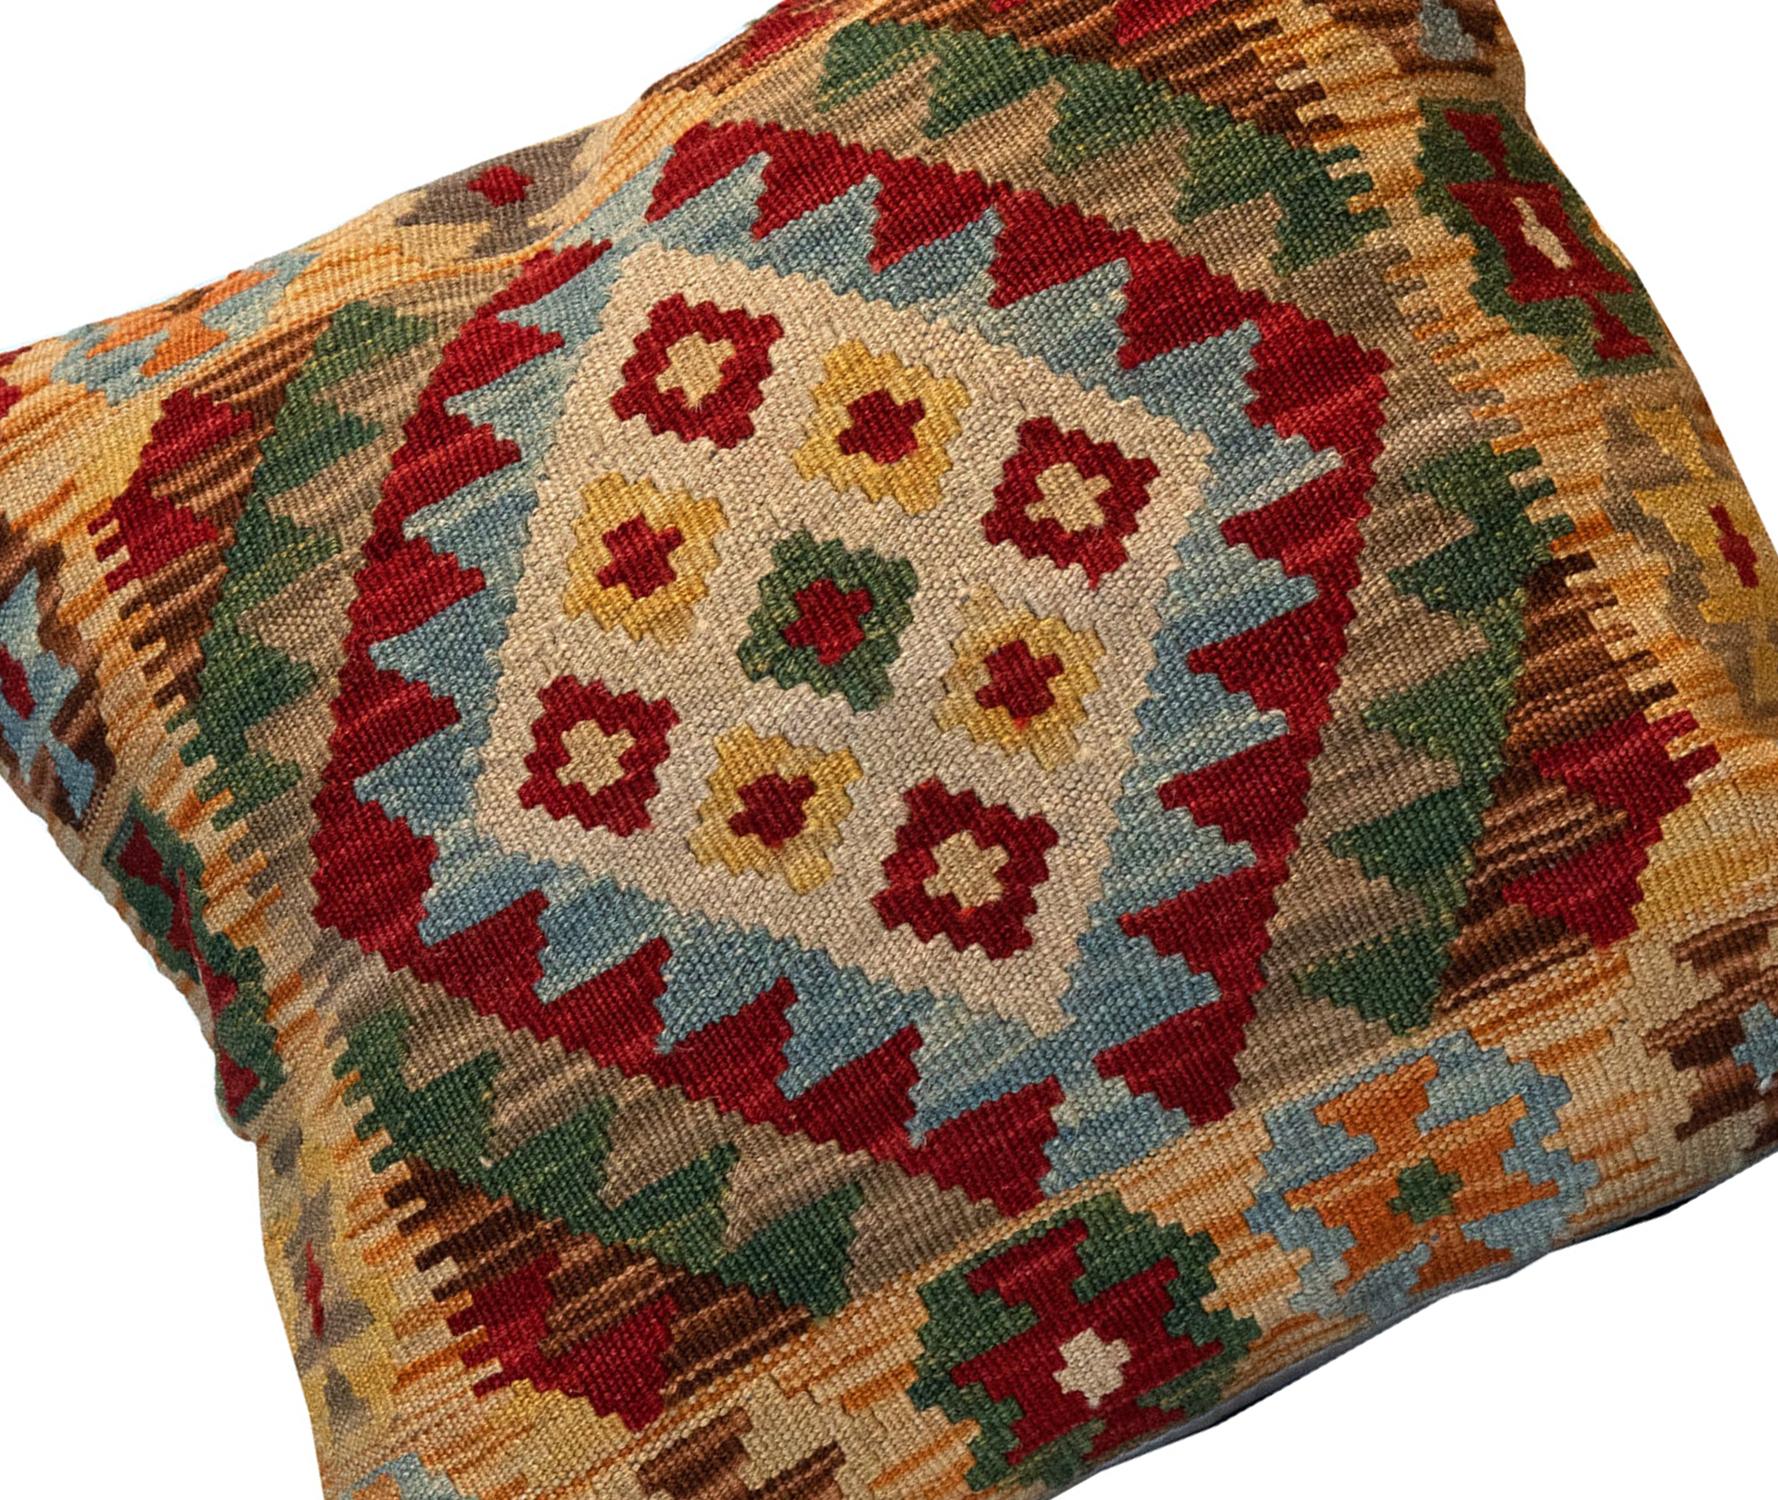 Vegetable Dyed Wool Geometric Pillow Traditional Kilim Cushion Cover Handwoven Beige Green